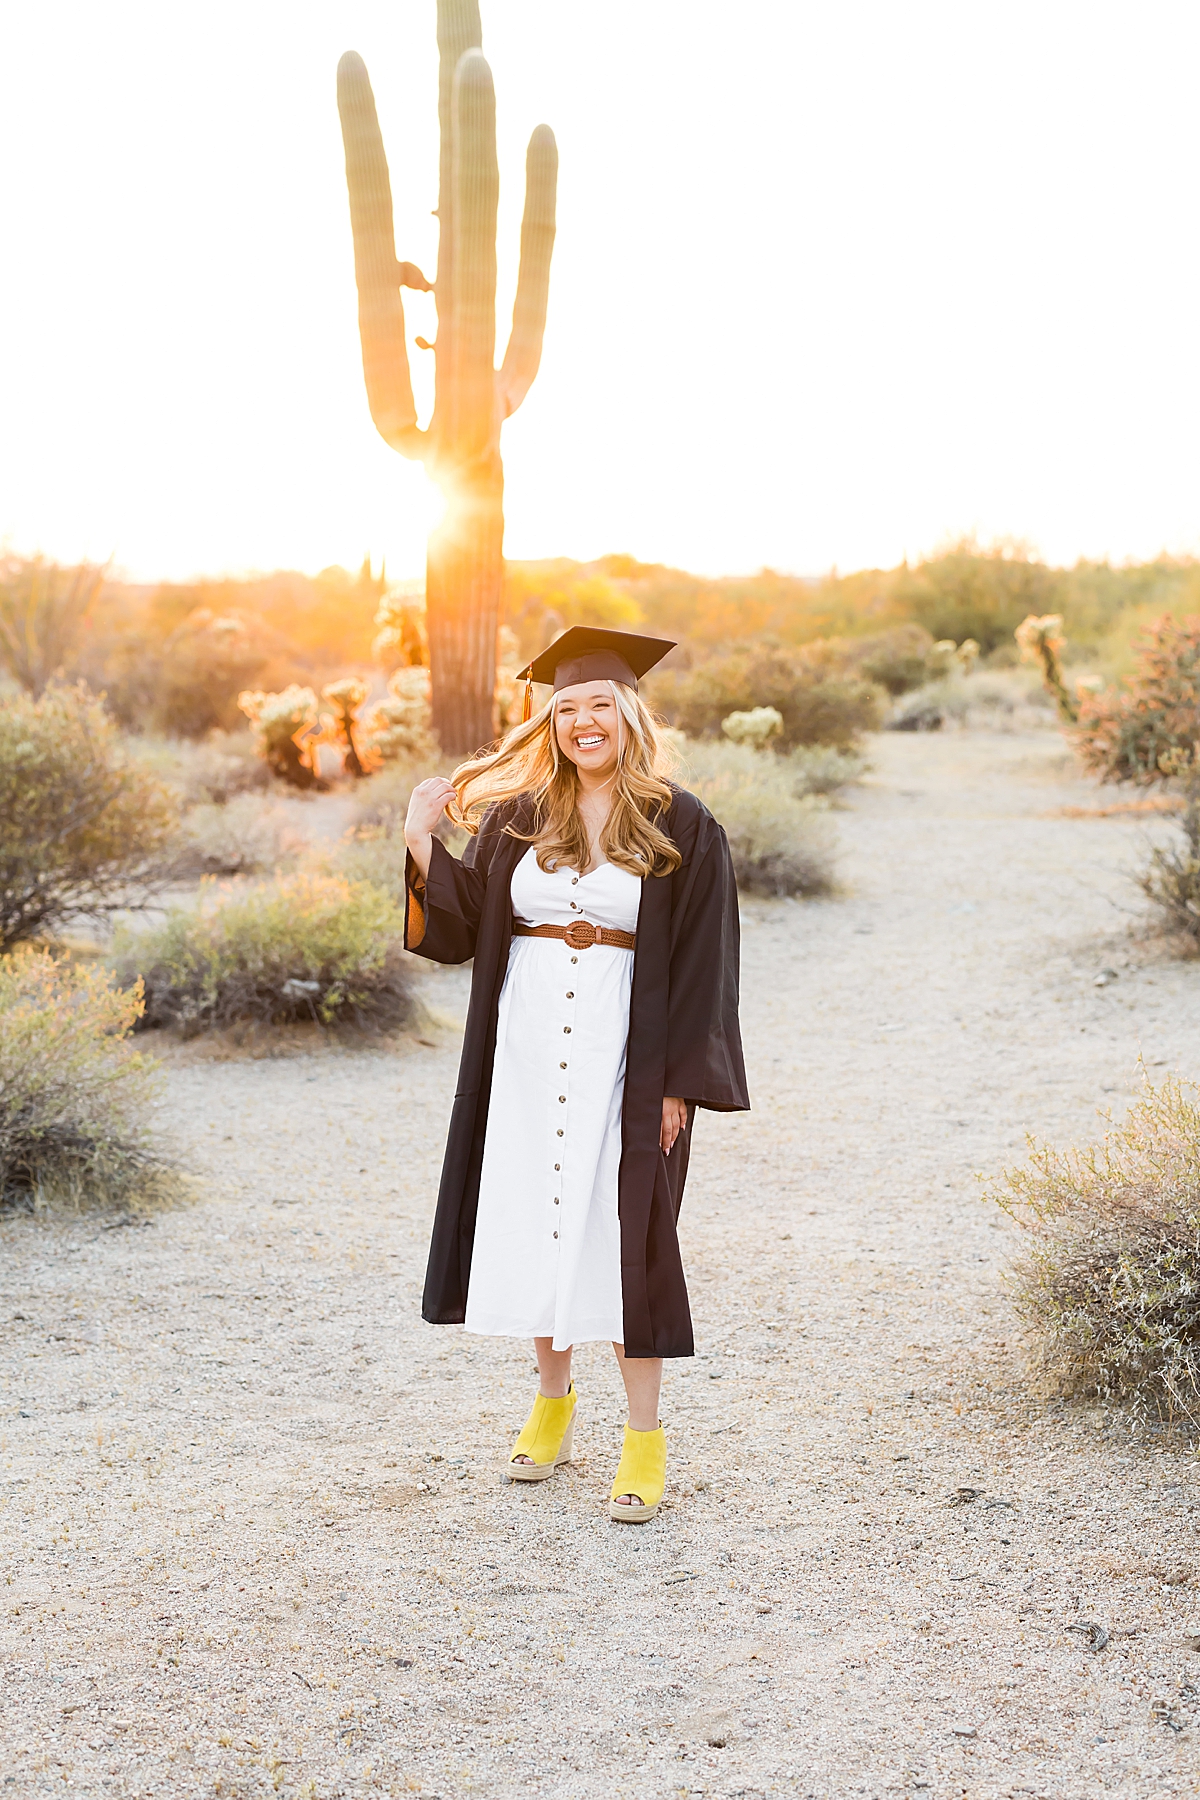 Leah Hope Photography | Scottsdale Arizona Senior Photographer | Phoenix Arizona High School Senior Pictures | Natural Light Photography | What to Wear | Senior Girl Poses and Posing Ideas | Senior Photo Shoot Outfit Inspiration | Outfits and Styling Fashion Ideas | Cactus Desert Scenery | Golden Hour Sunset Light | Cap and Gown | Graduation Pictures